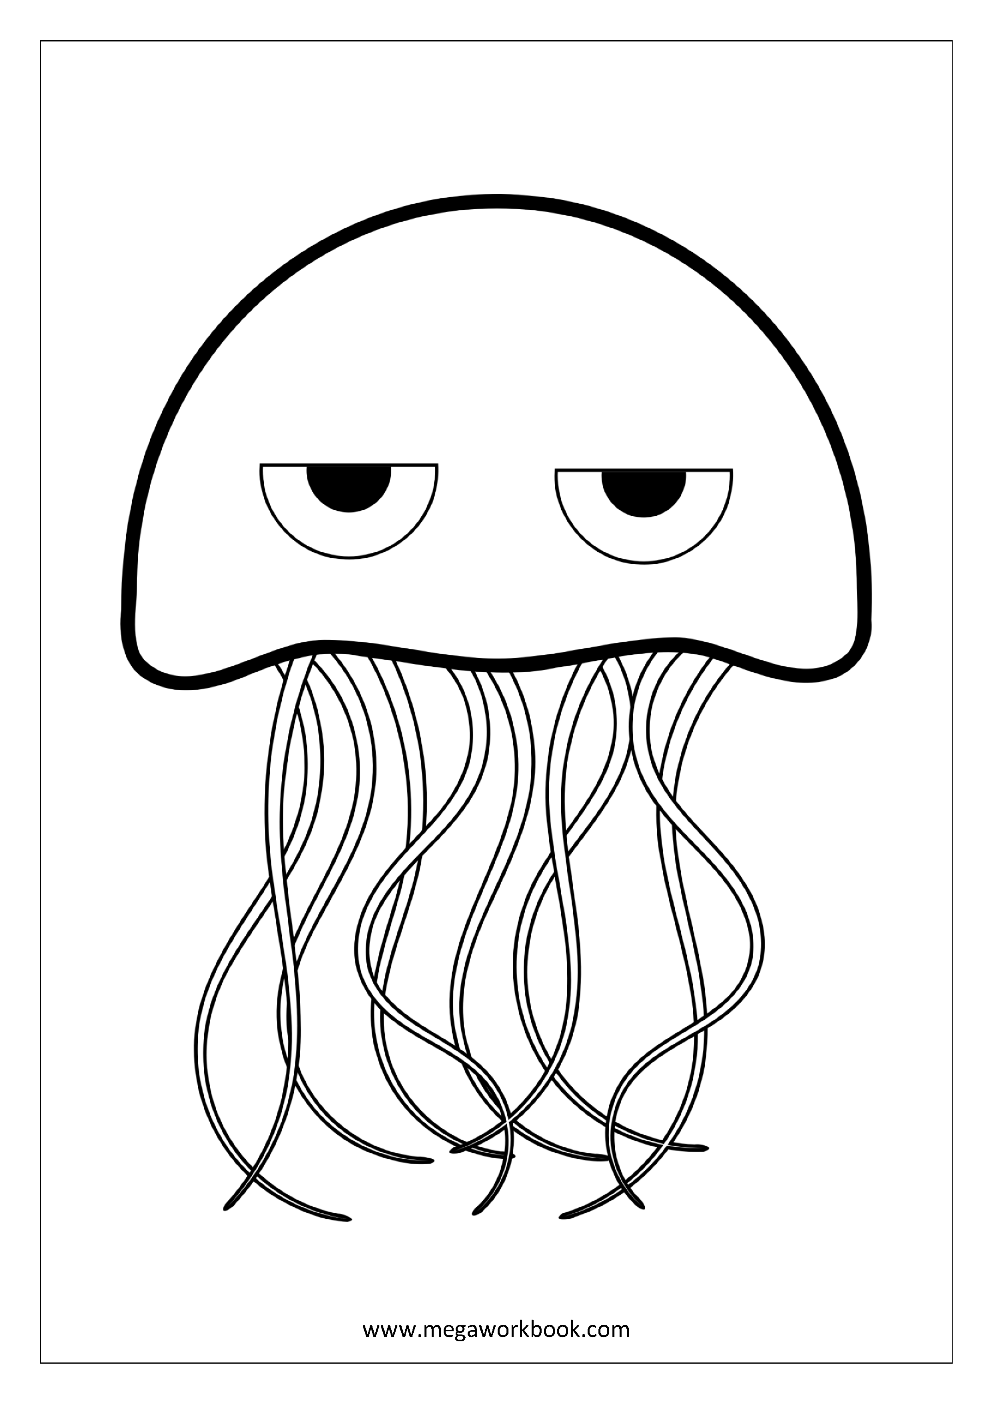 Download Animal Coloring Pages, Sea Animals Coloring Pages, Insects ...